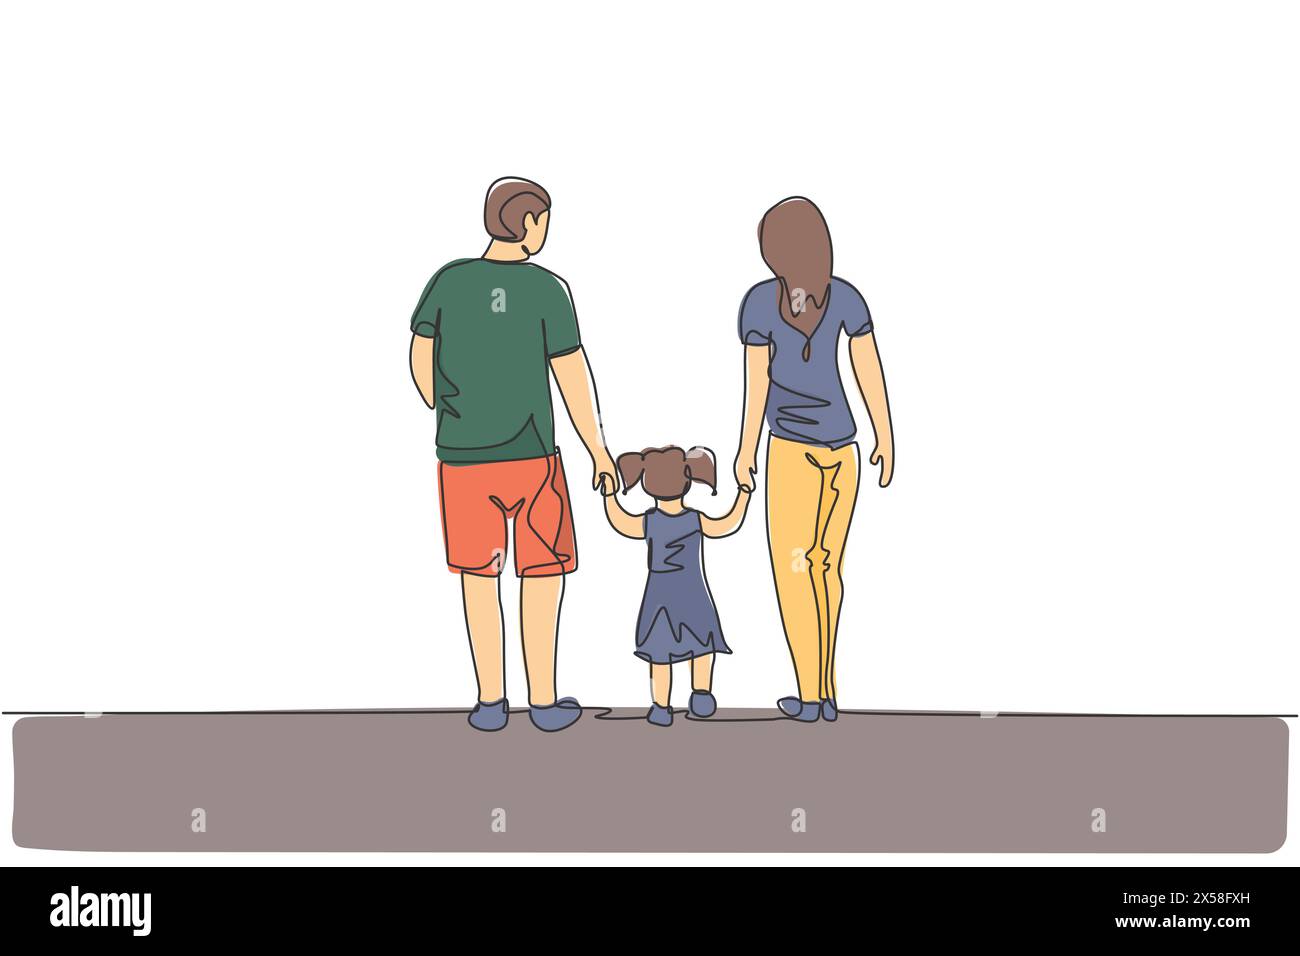 Single continuous line drawing of happy young father and mother lead their daughter walking together, holding her hands. Happy family concept. Trendy Stock Vector